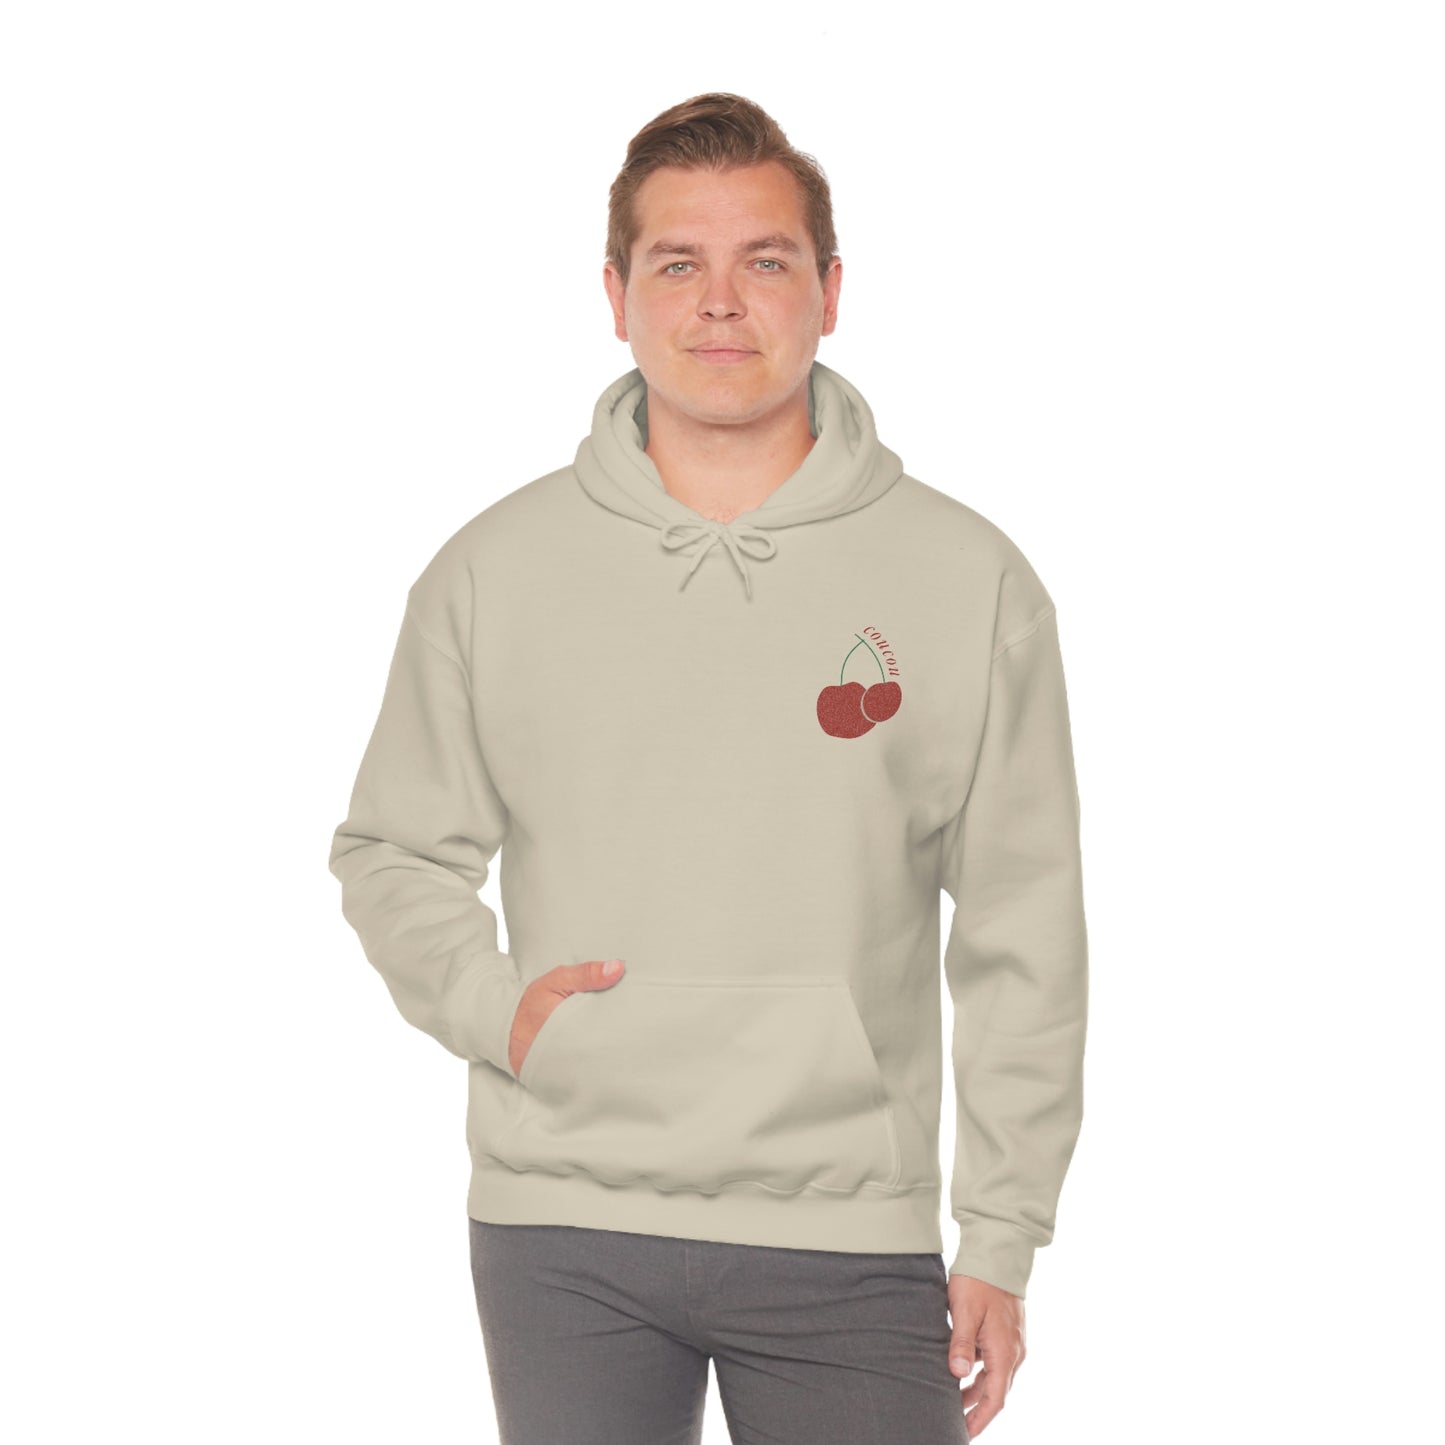 Cou Cou Voicemail Hooded Sweatshirt